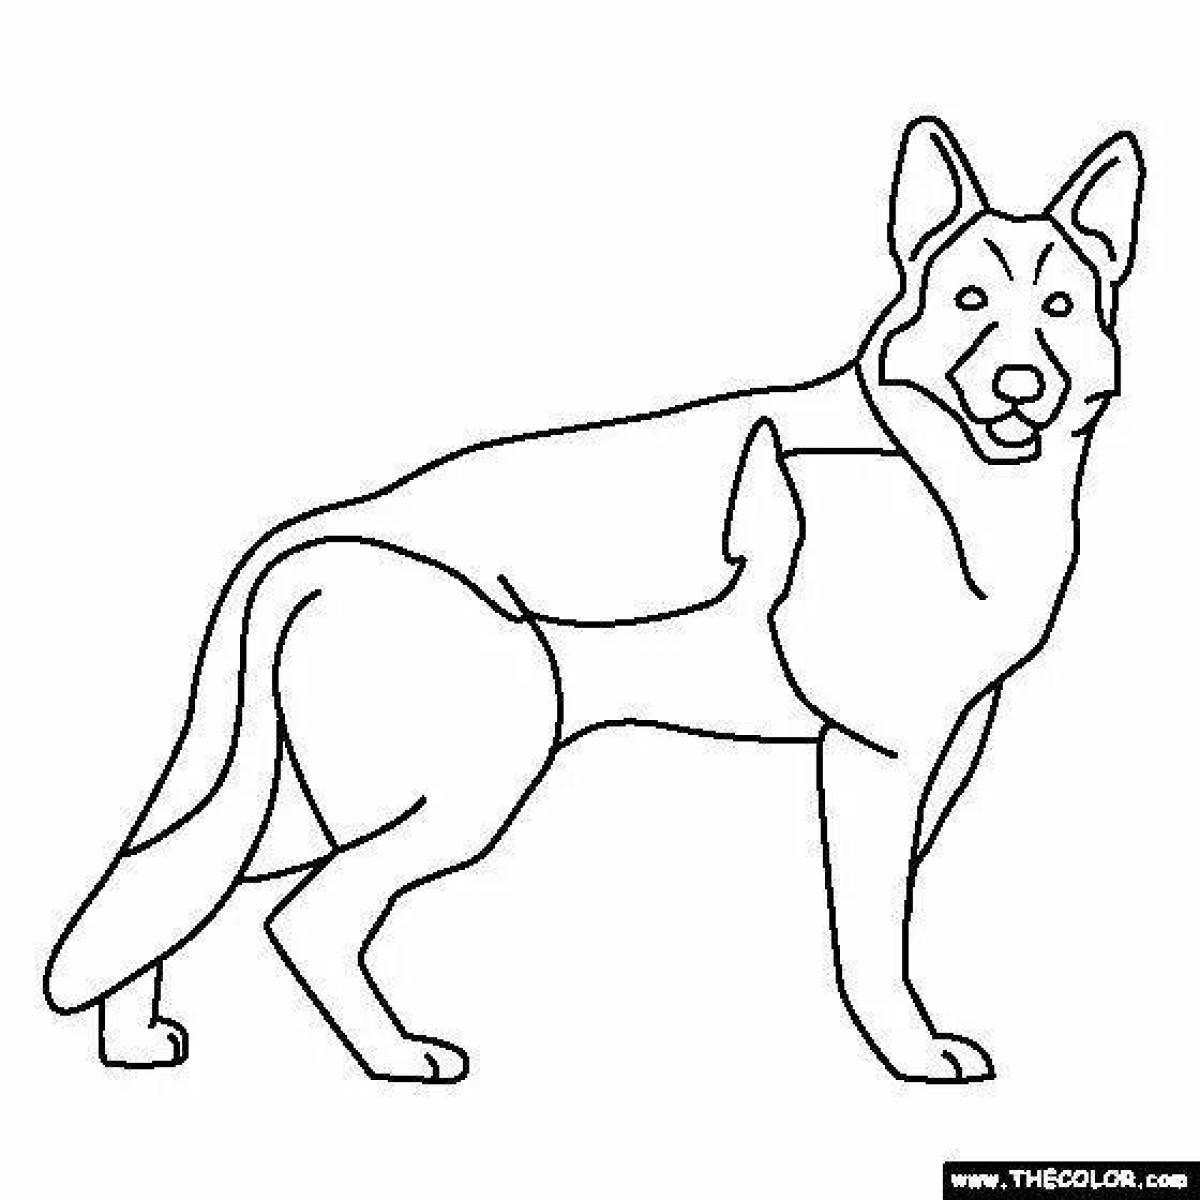 Witty shepherd dog coloring book